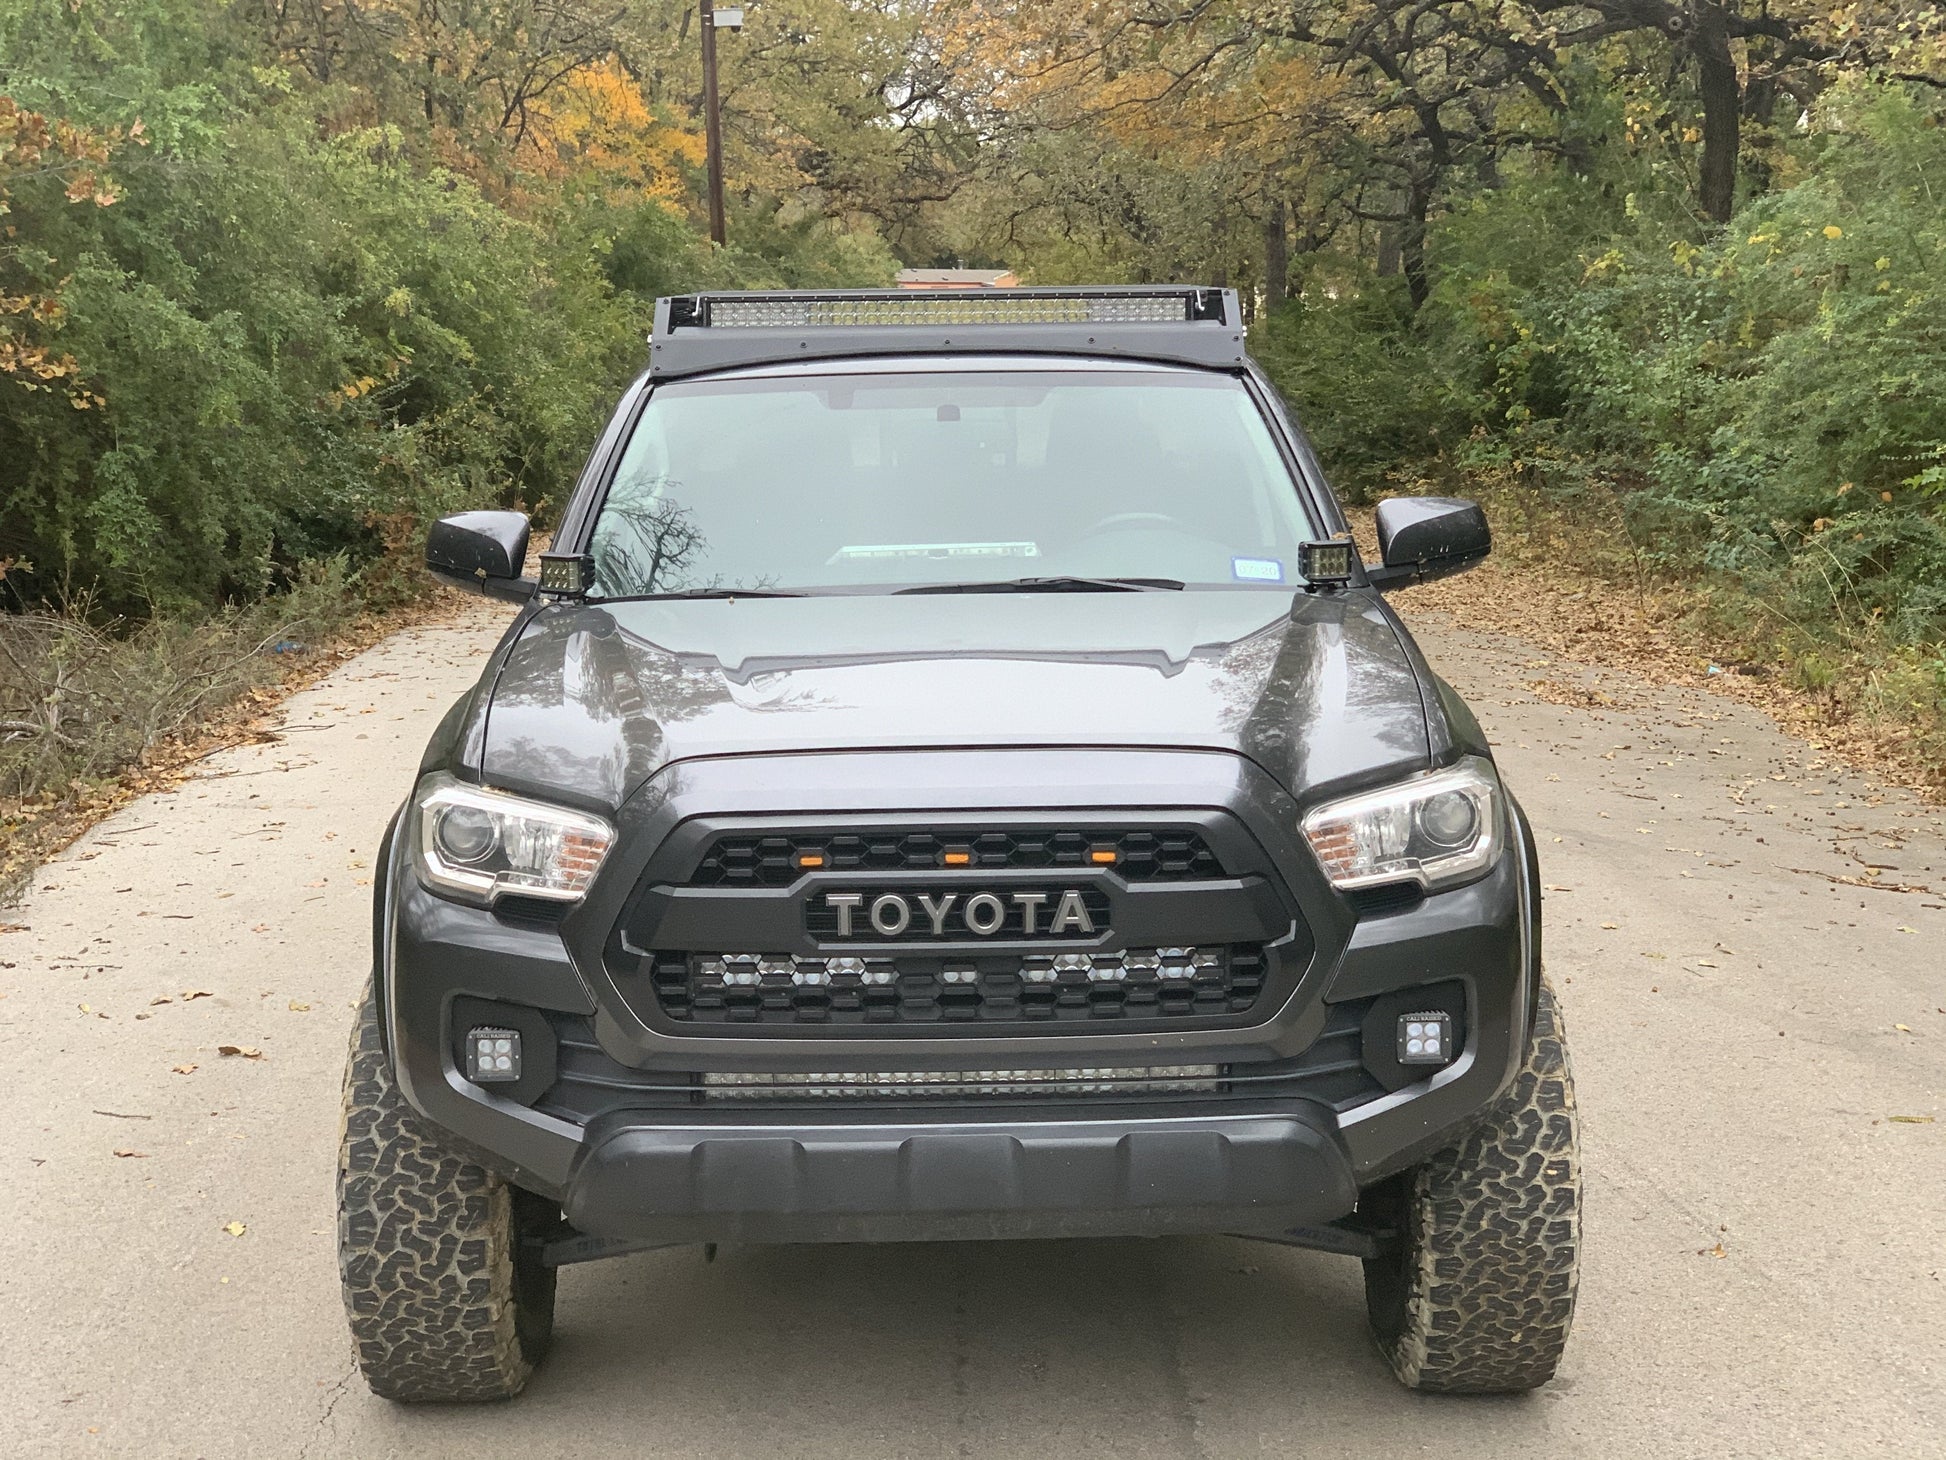 Front view of gray Toyota Tacoma with Premium roof rack with covered light bar - Cali Raised LED